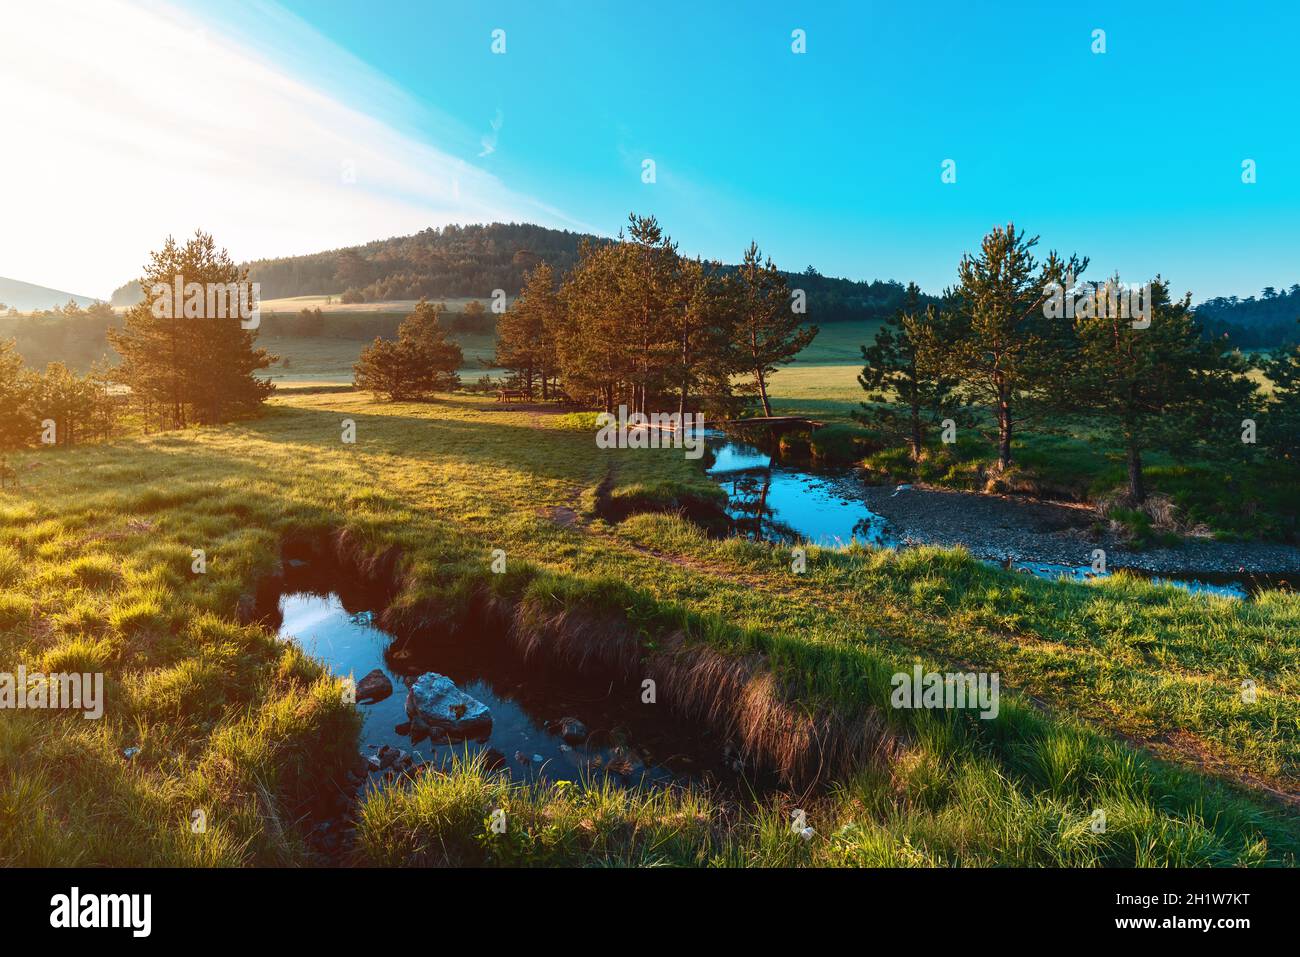 Vodice landscape with white pines and pastures, creek and untamed nature in Zlatibor region, Serbia. Wide angle shot of beautiful location. Stock Photo